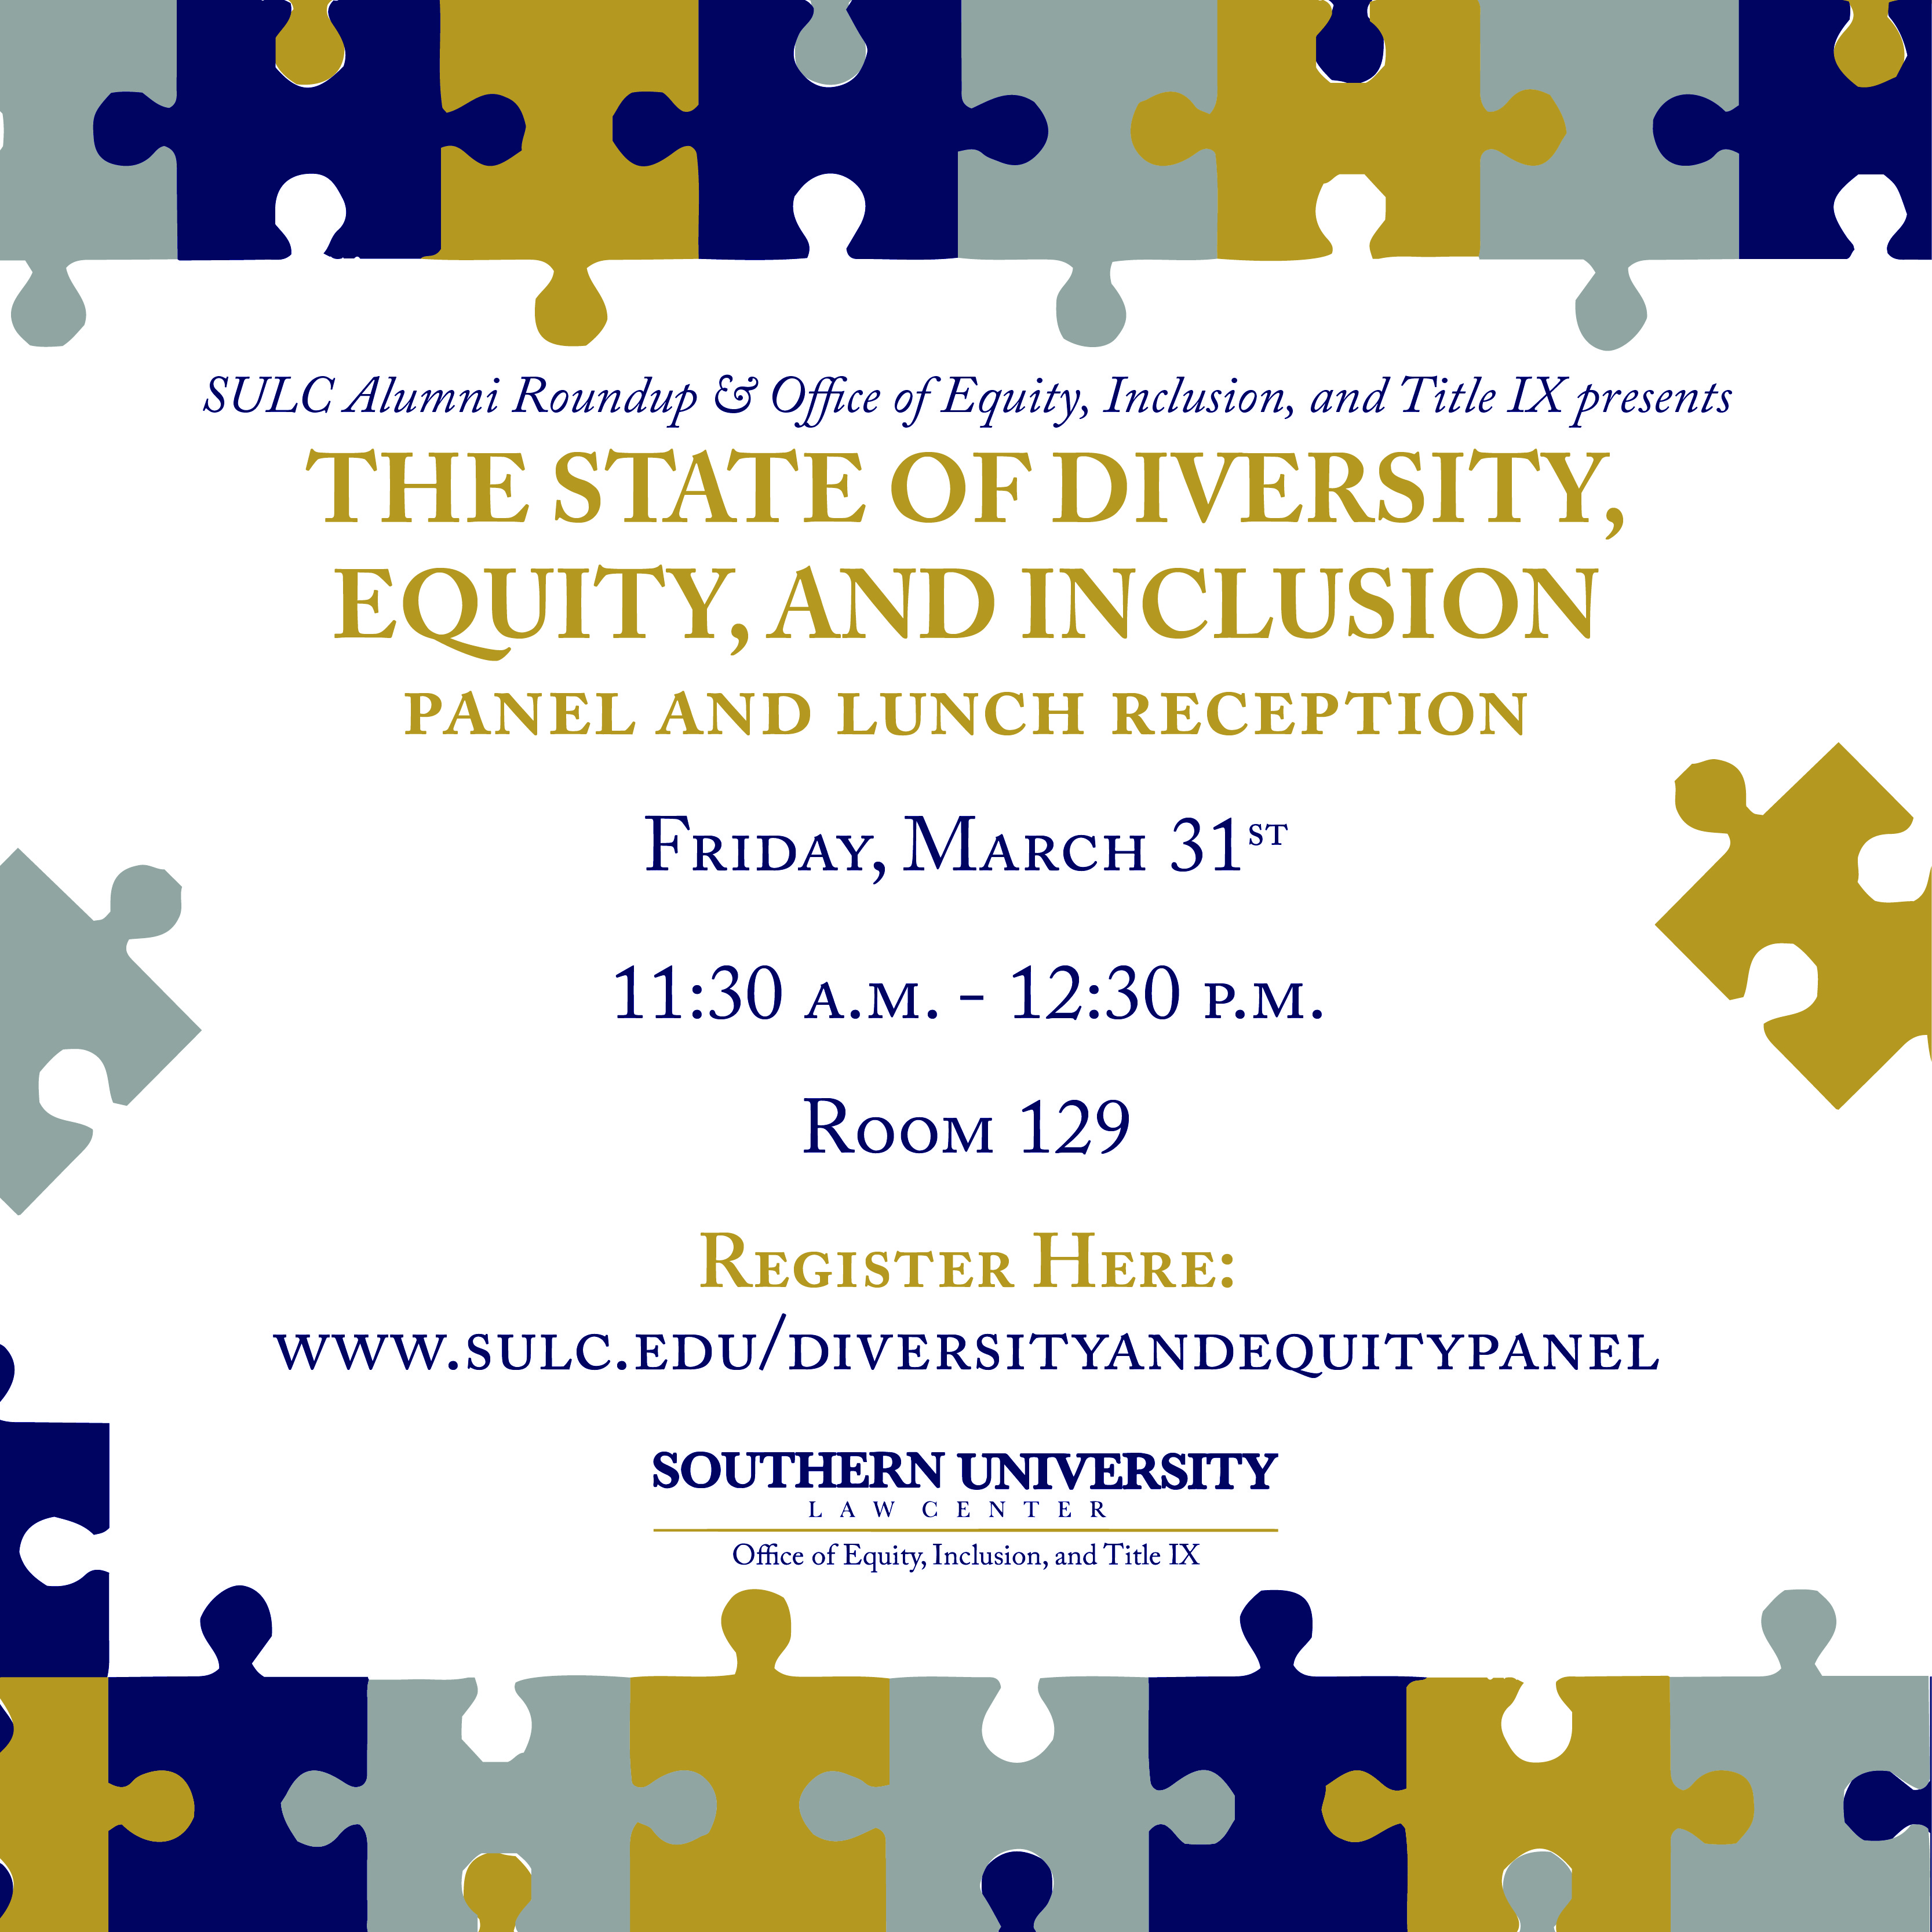 The State of Diversity, Equity, and Inclusion-Panel & Lunch Reception